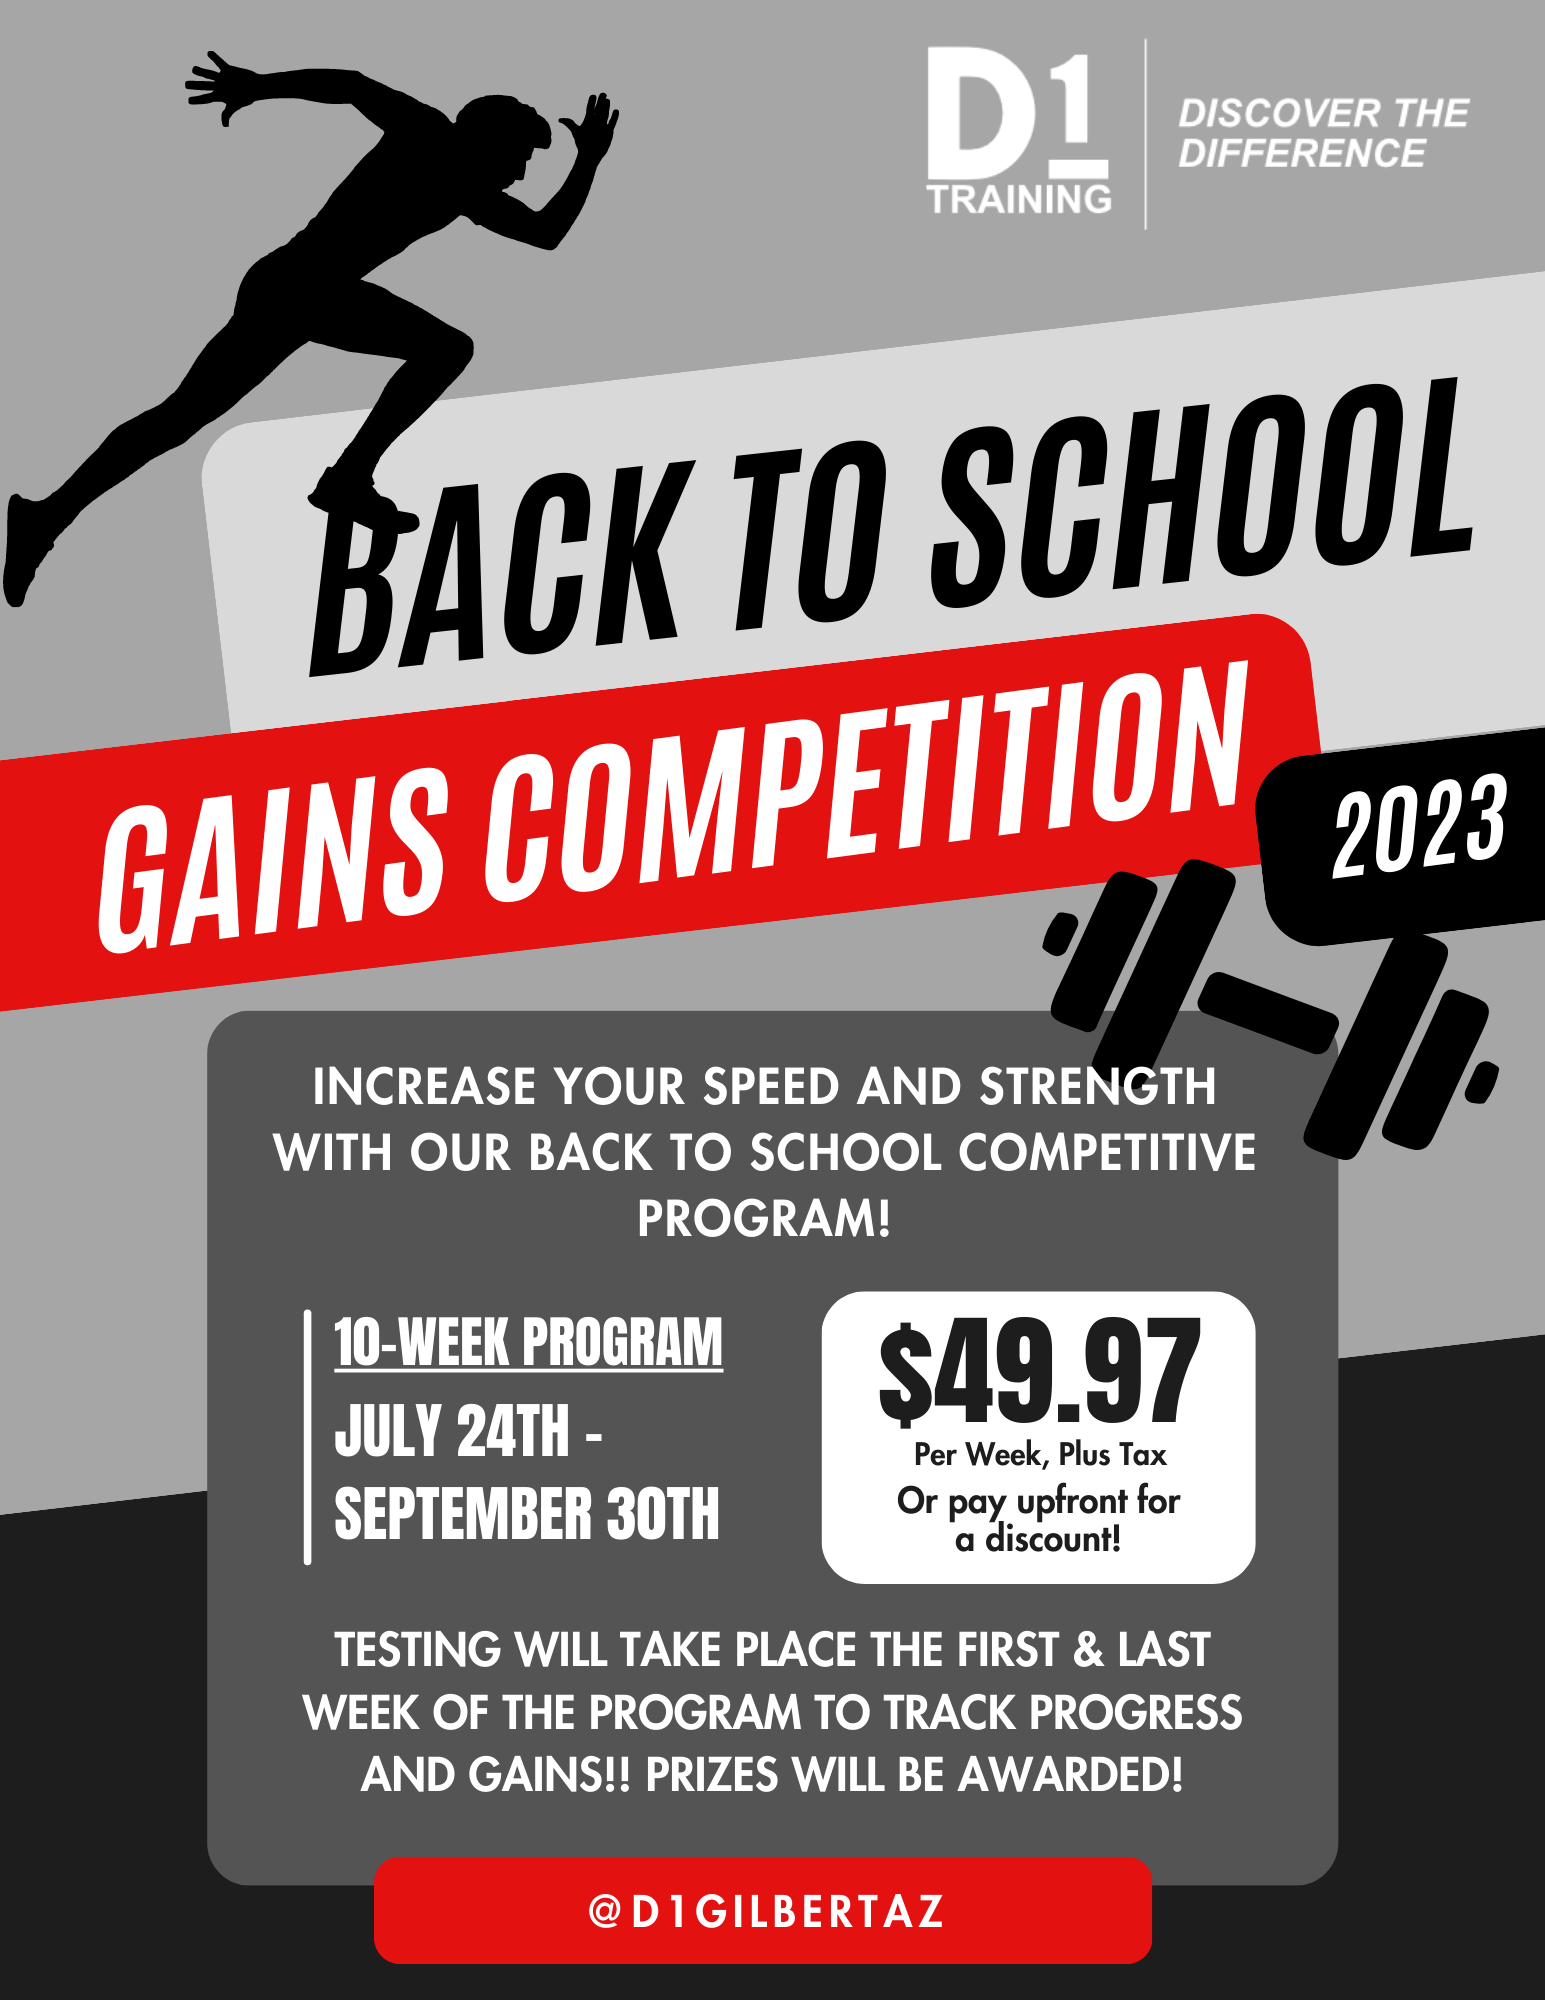 Back to School Gains Competition hosted by D1 Training